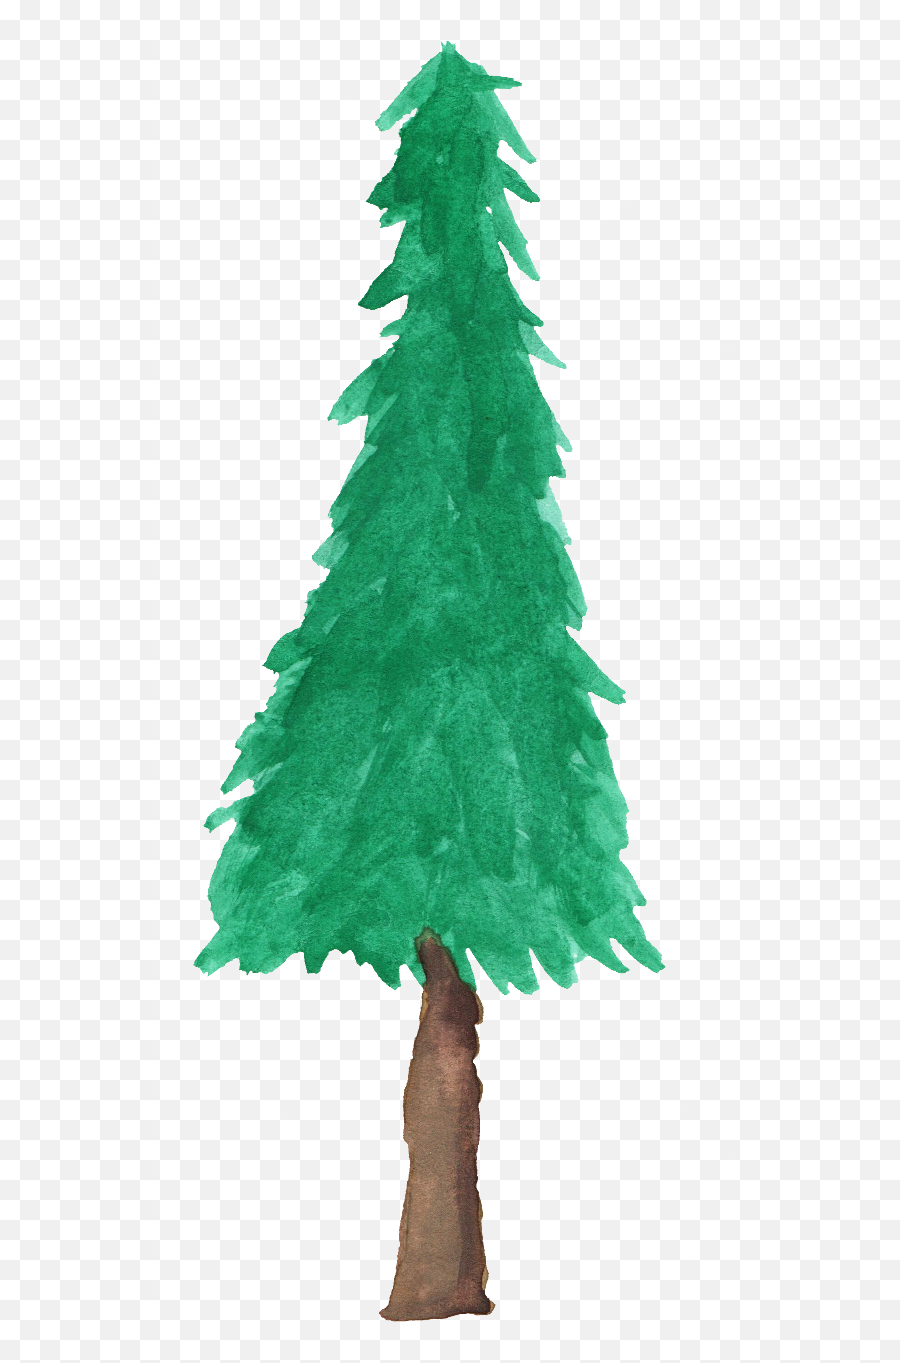 Watercolor Pine Tree - Pine Tree Watercolor Free Png,Pine Tree Transparent Background